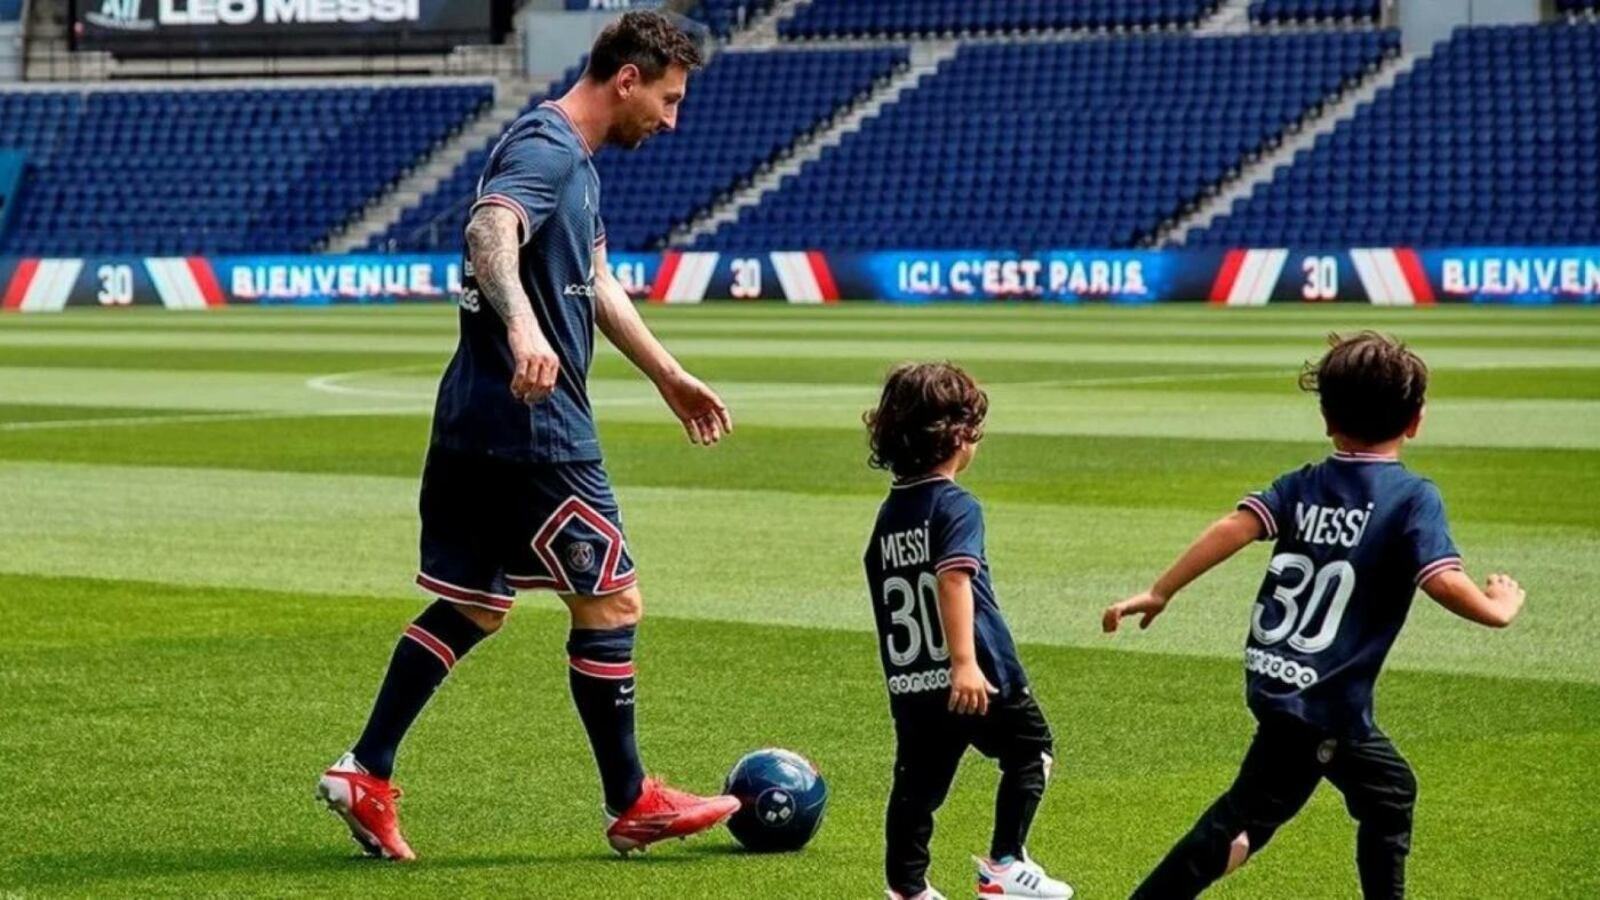 Thiago Messi, Lionel Messi's son is now a member of the PSG youth